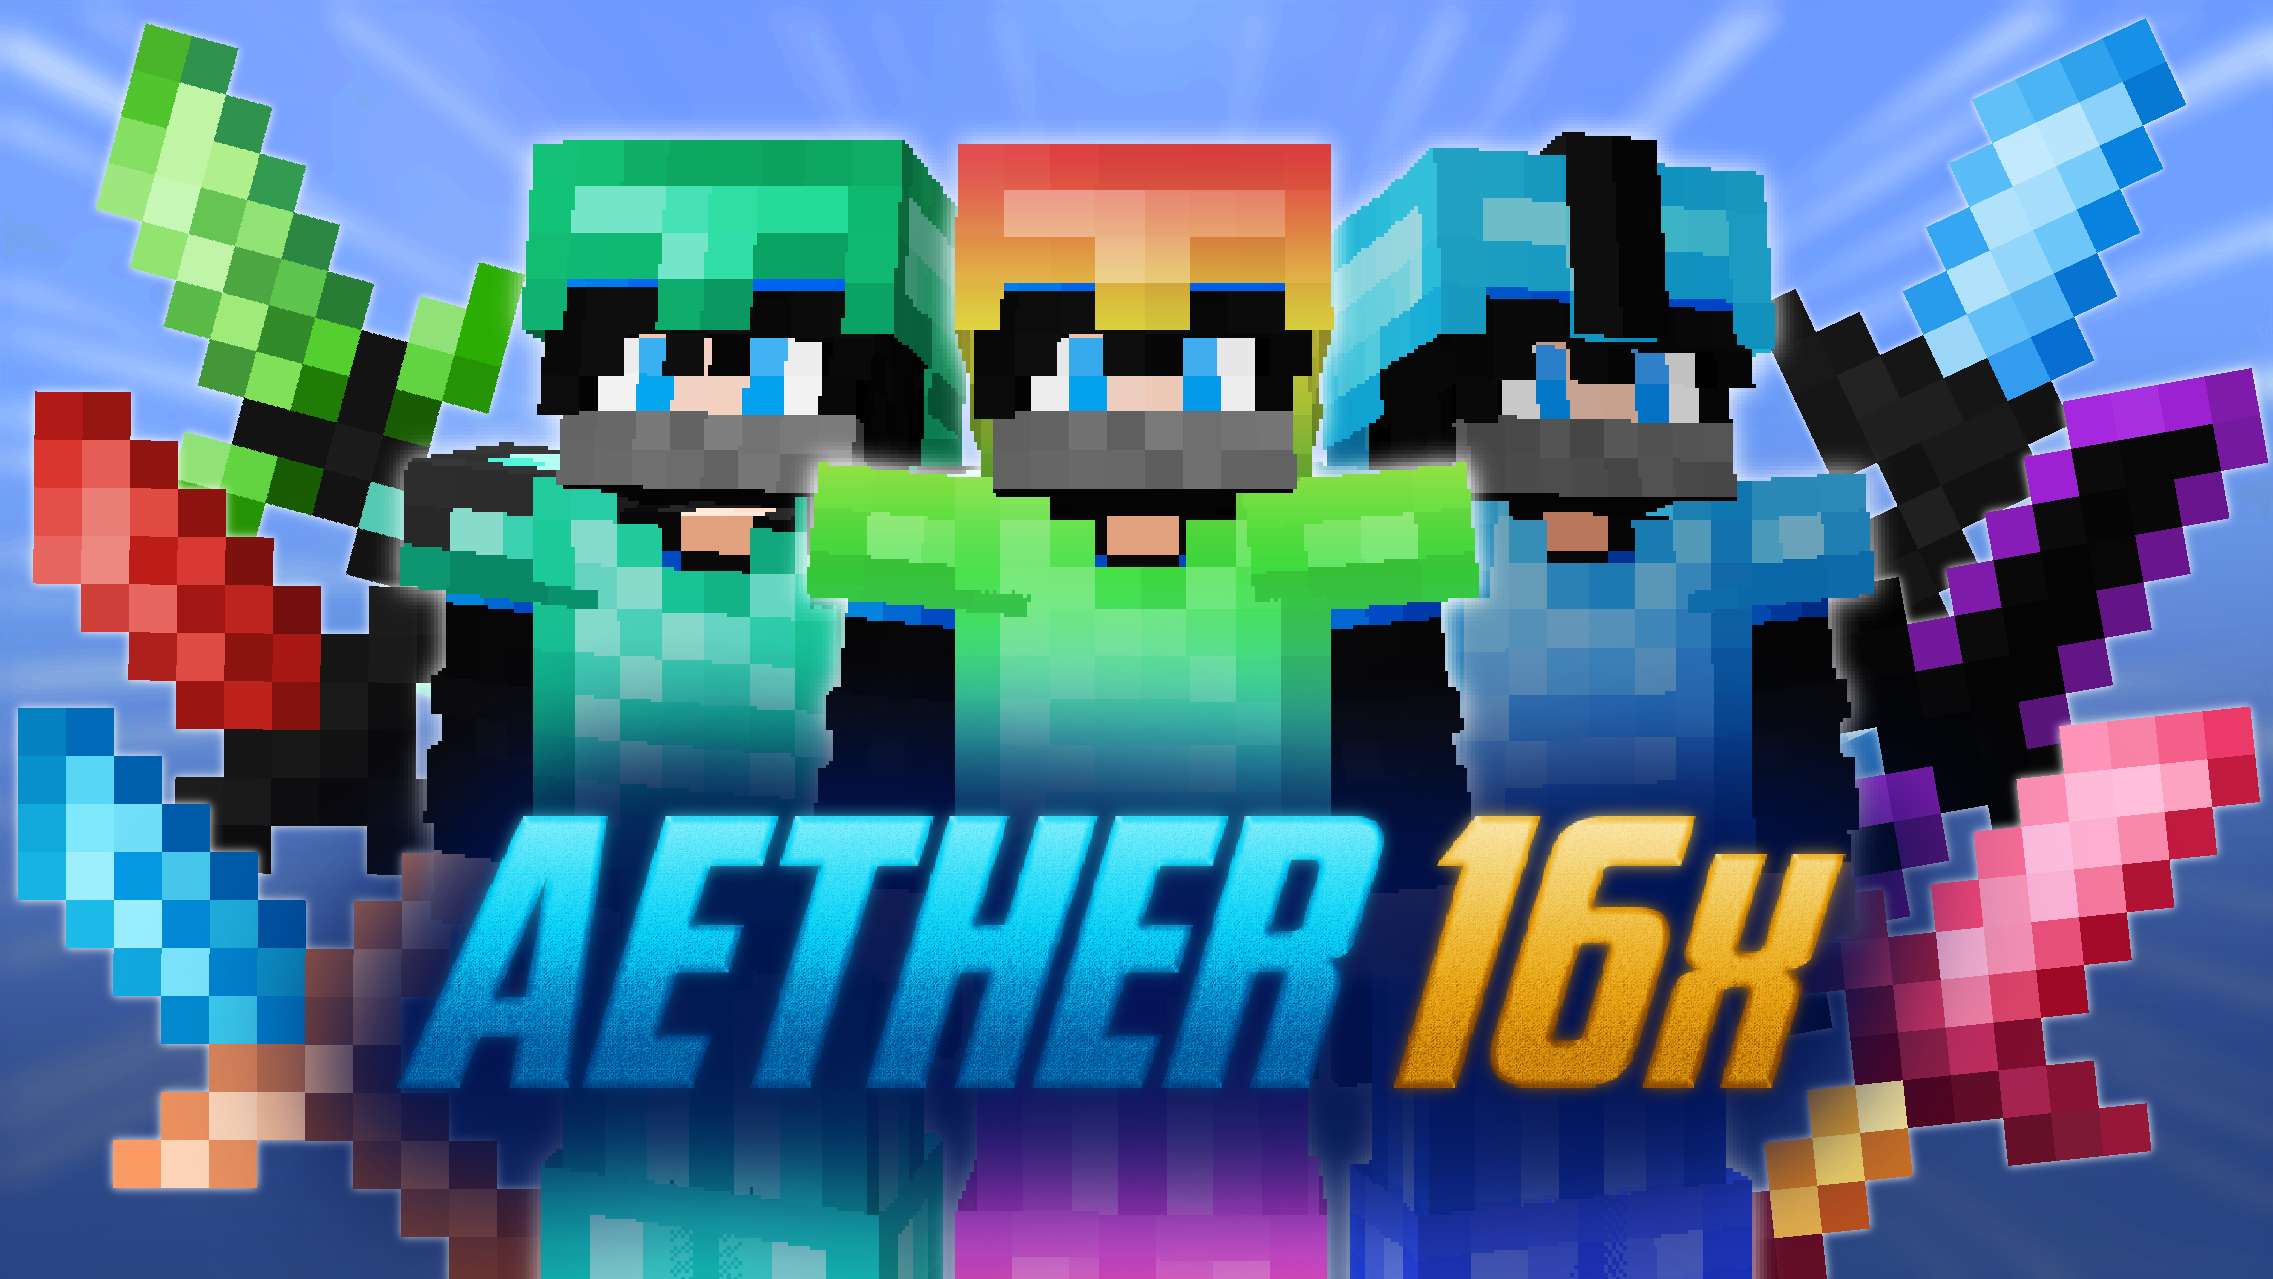 Aether 16x [BenBGamer] 16x by Mqryo on PvPRP